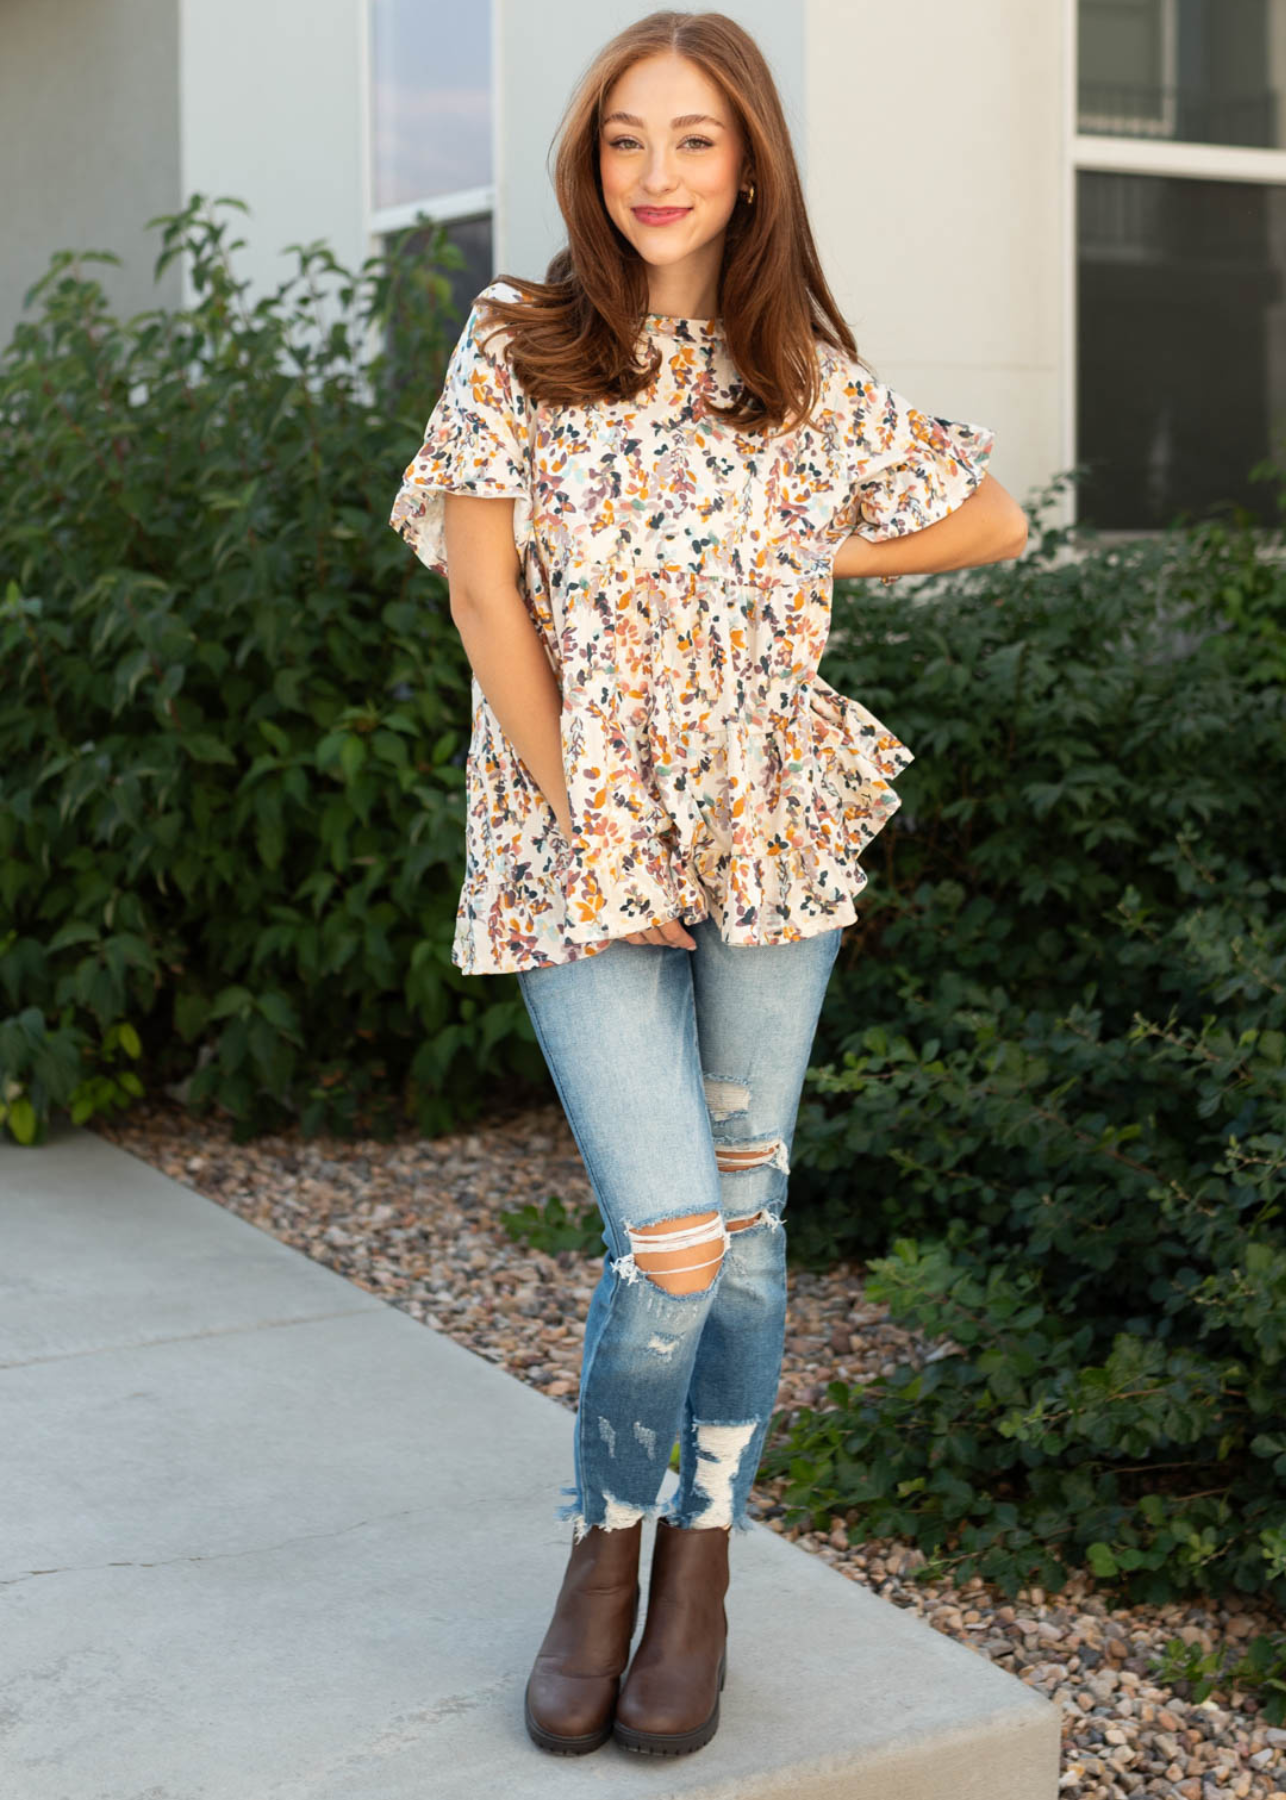 Short sleeve cream top with a floral top and ruffle at the hem